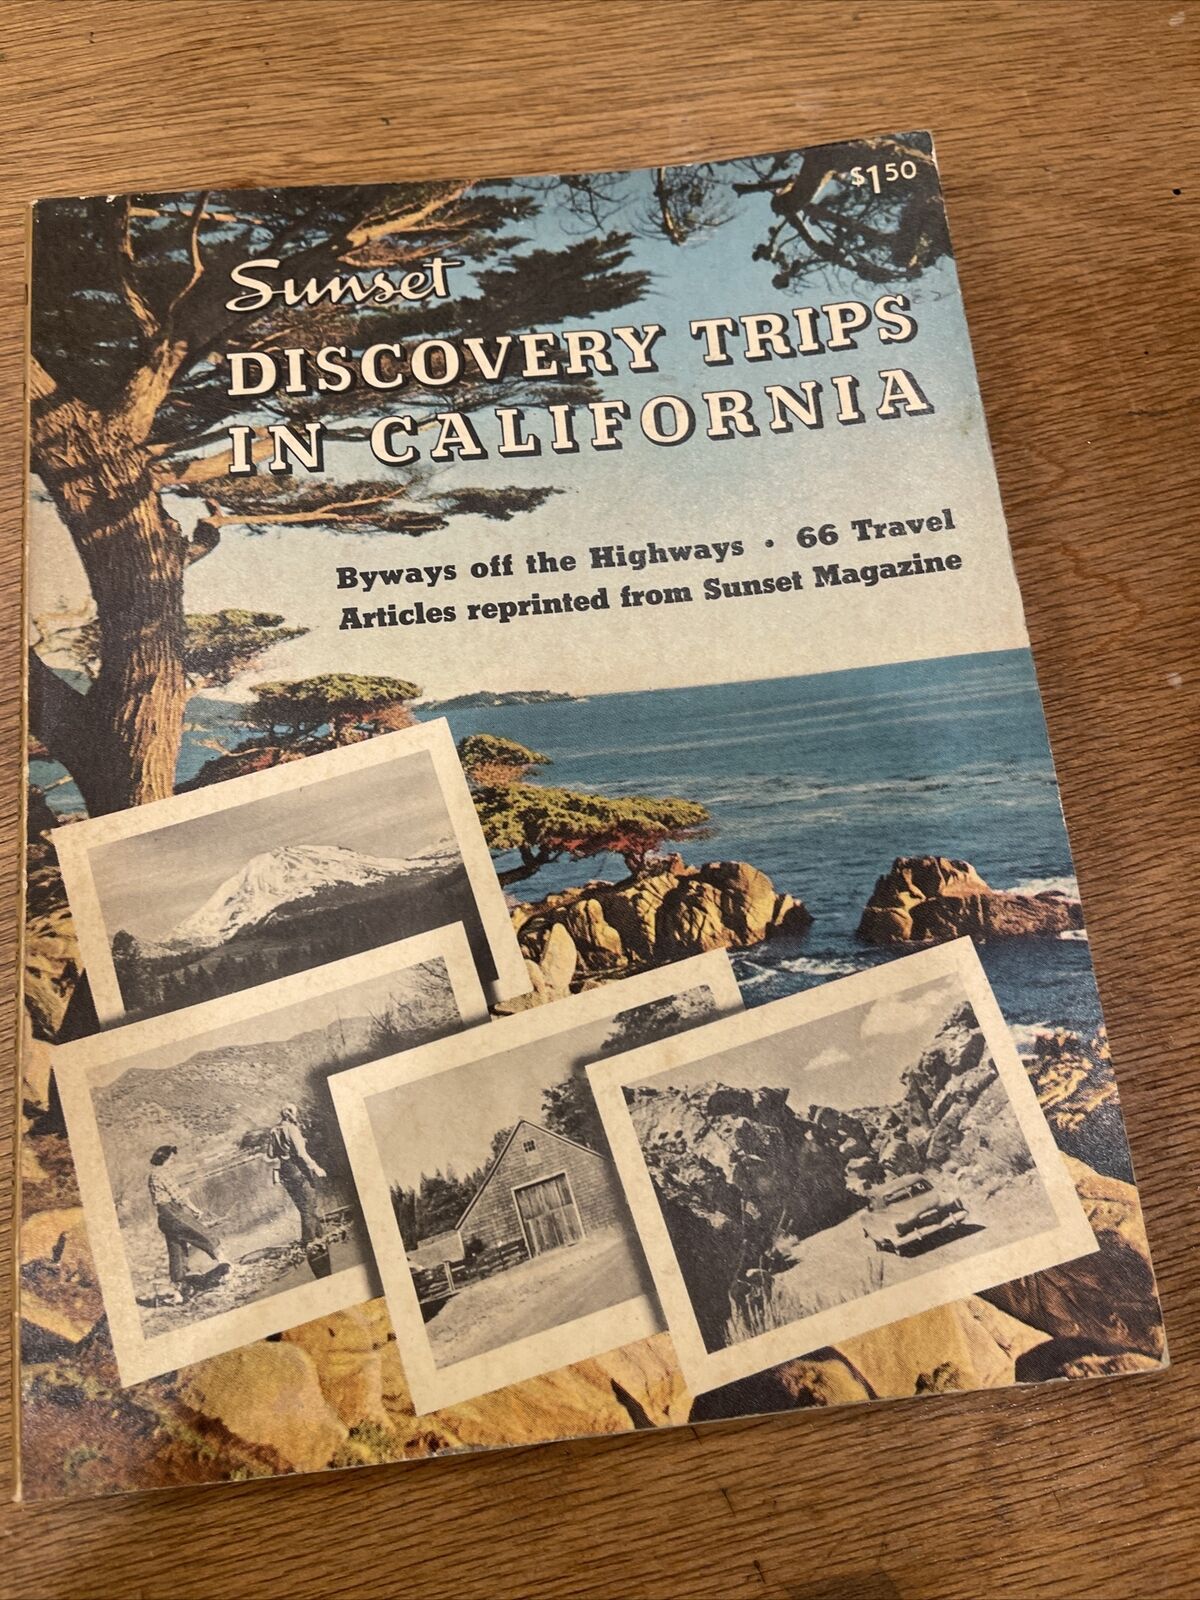 Vintage Sunset Discovery Trips in California - 1st Edition - 1955 Highway 66 